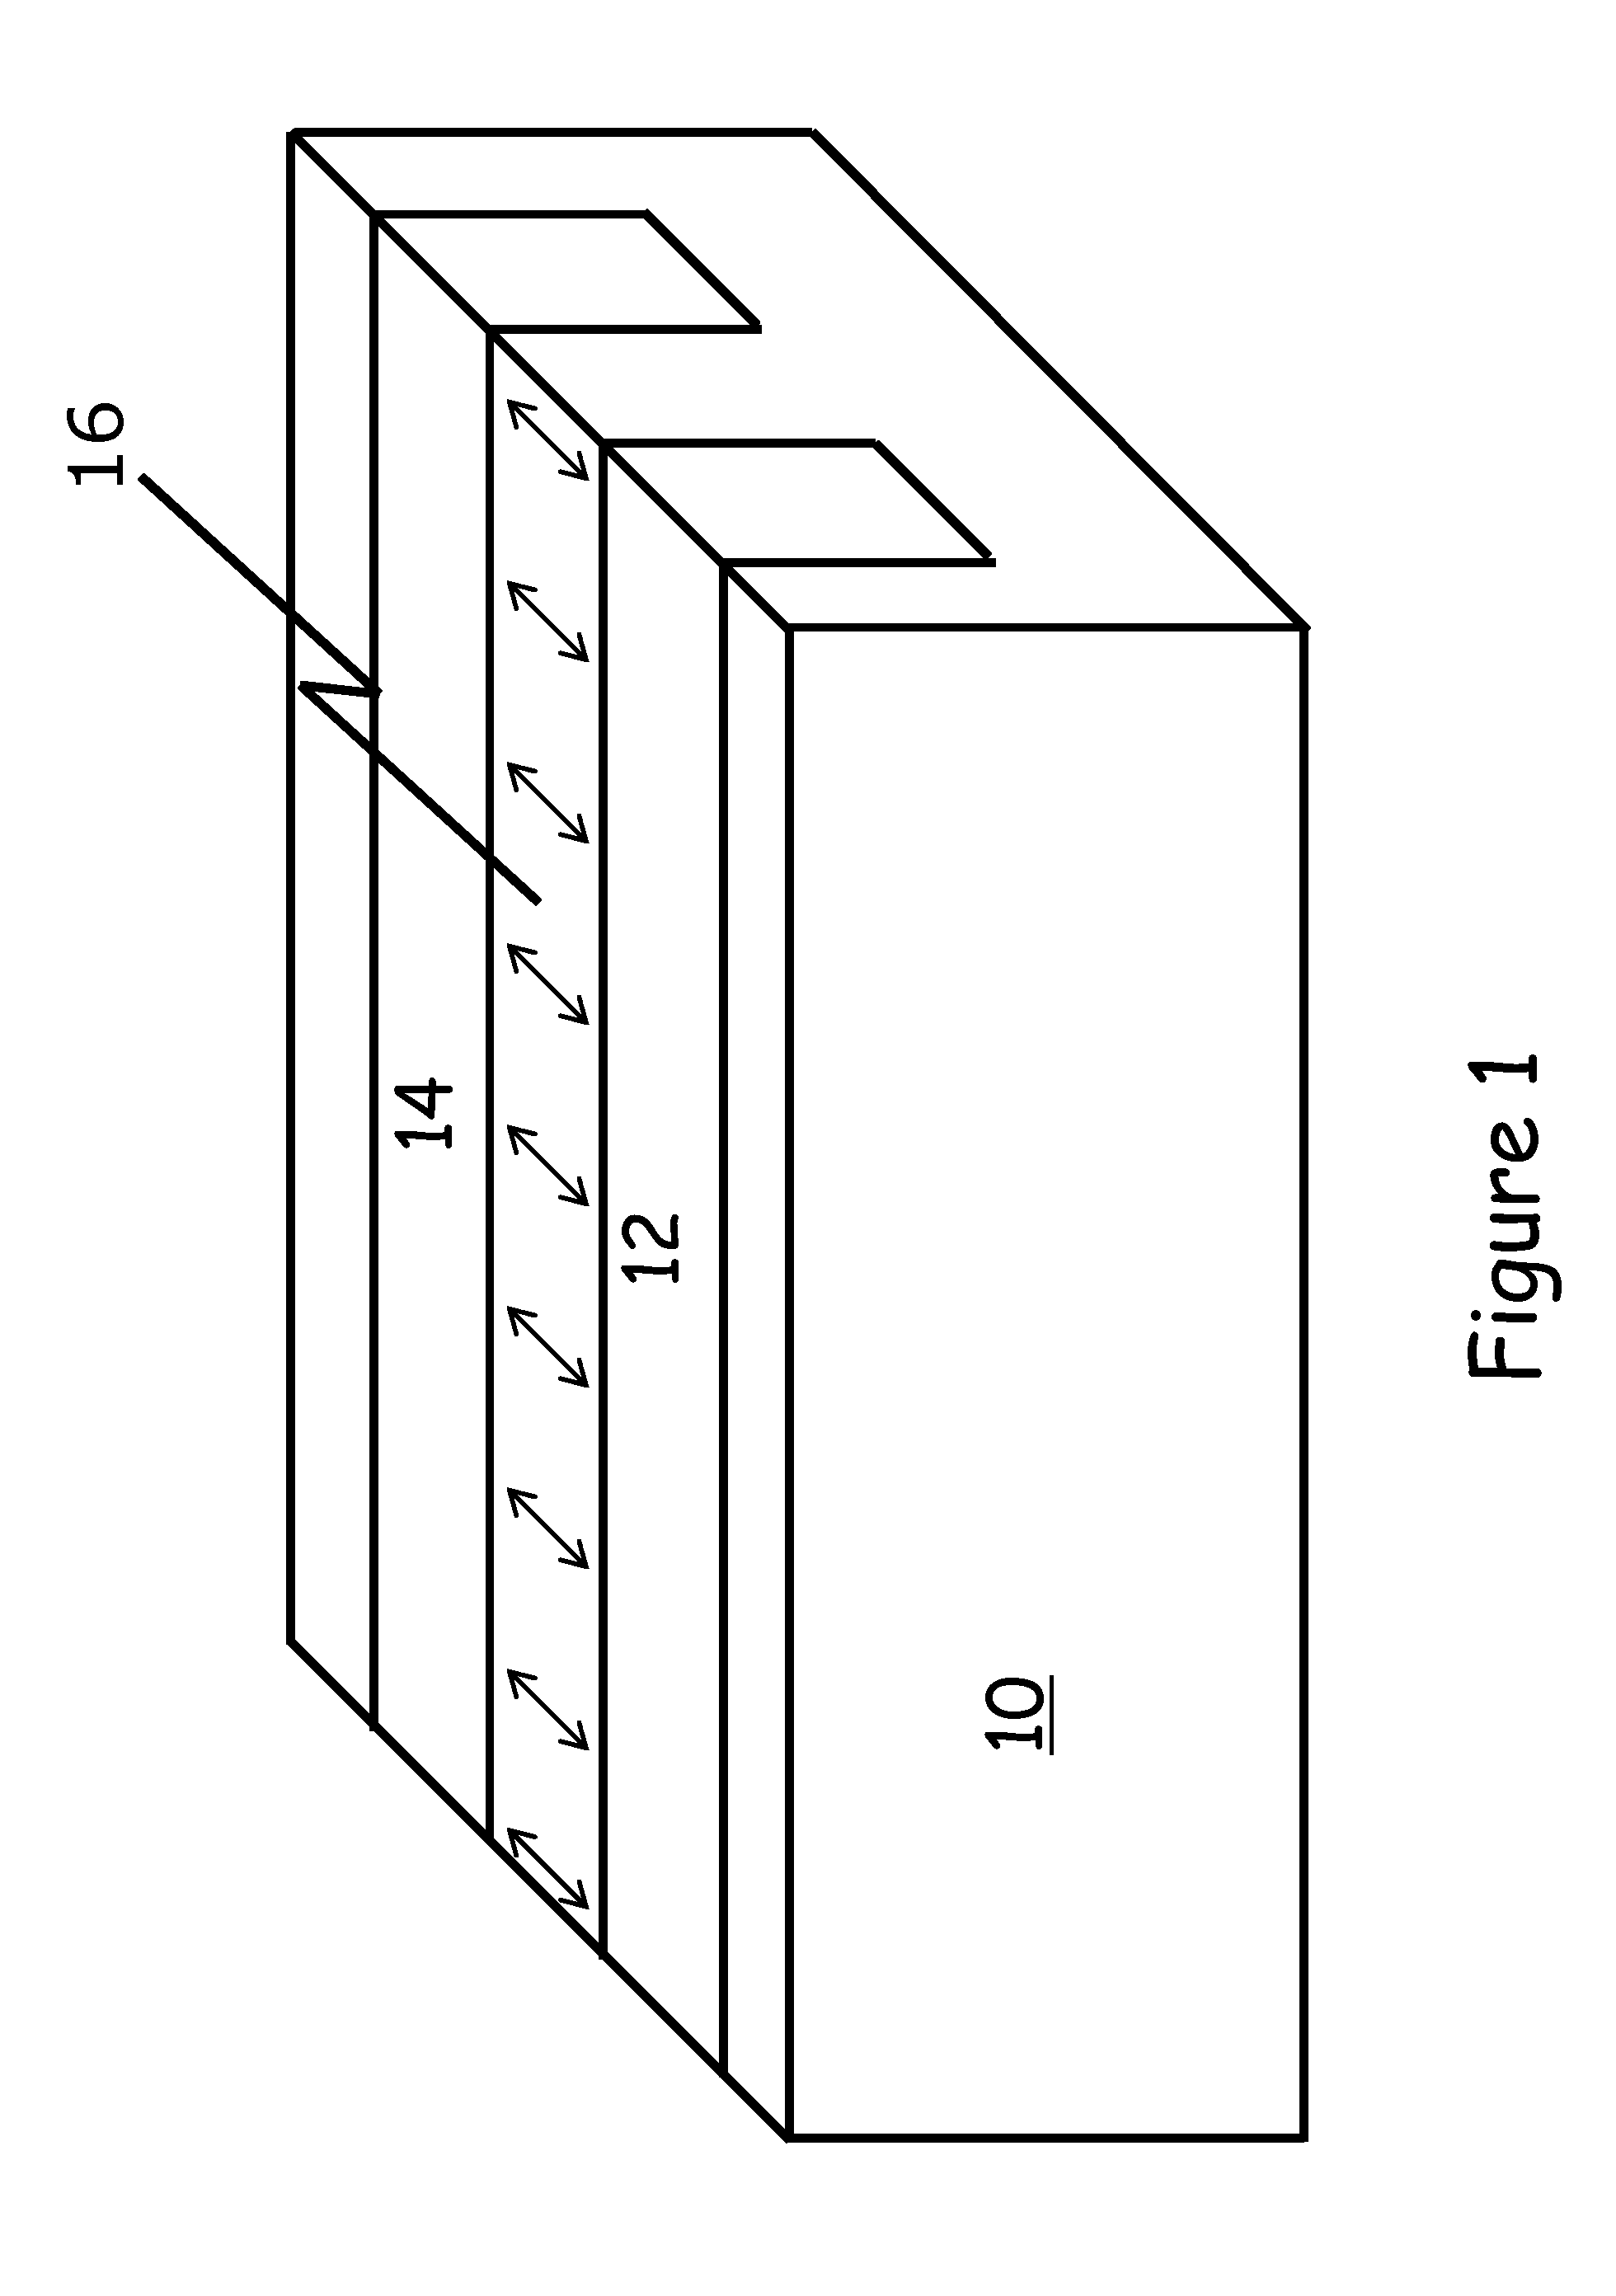 Tensile strained semiconductor photon emission and detection devices and integrated photonics system